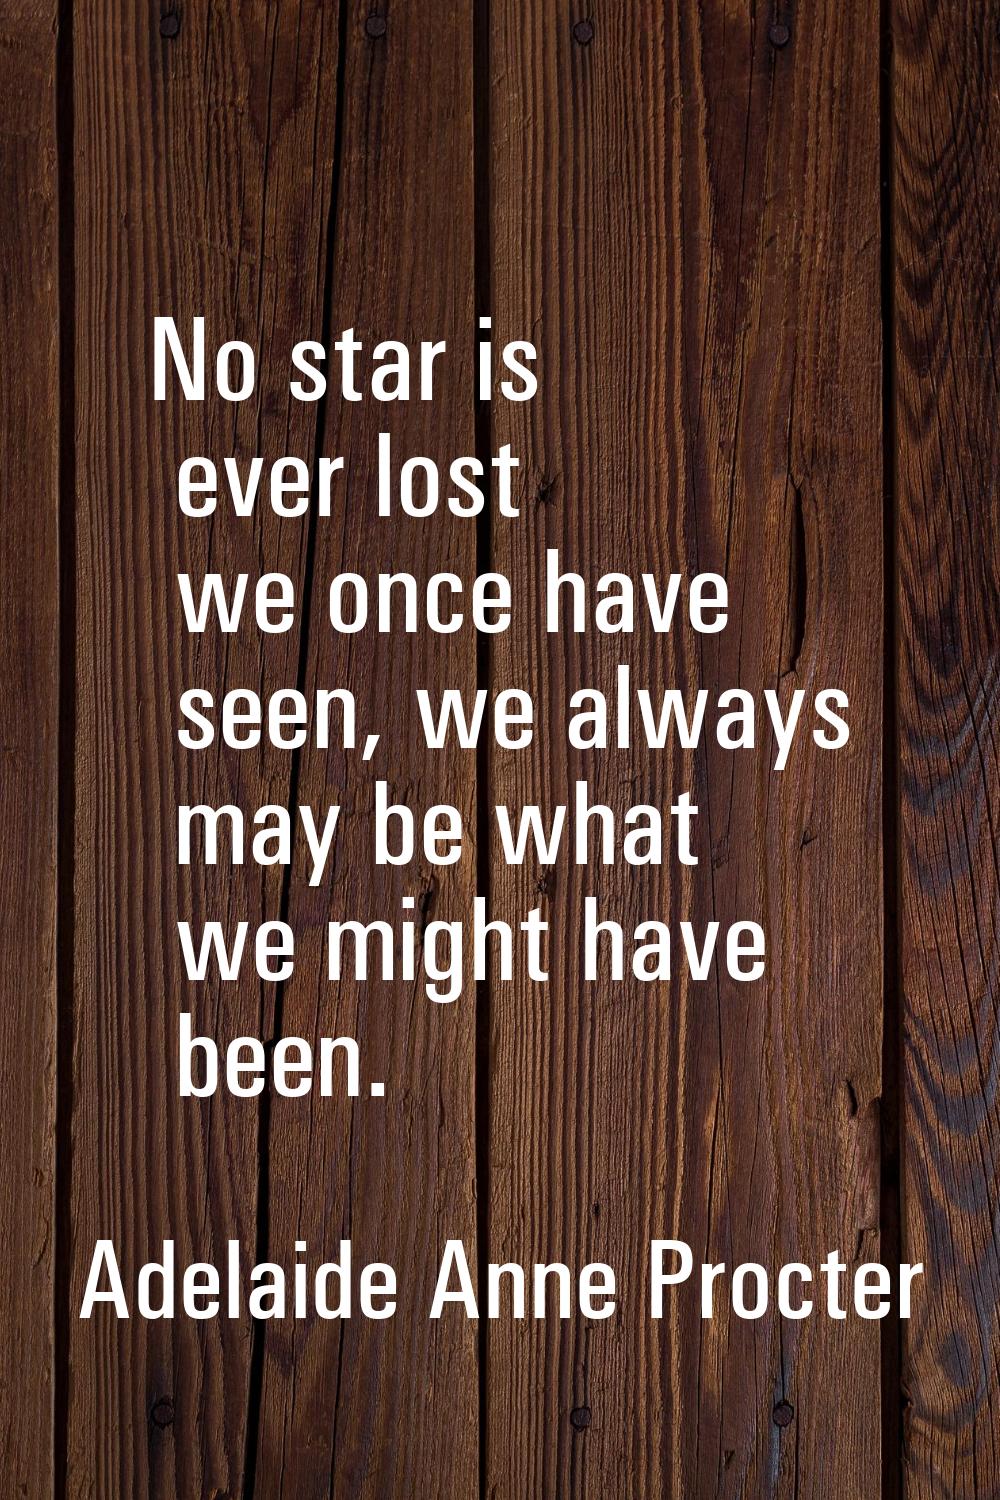 No star is ever lost we once have seen, we always may be what we might have been.